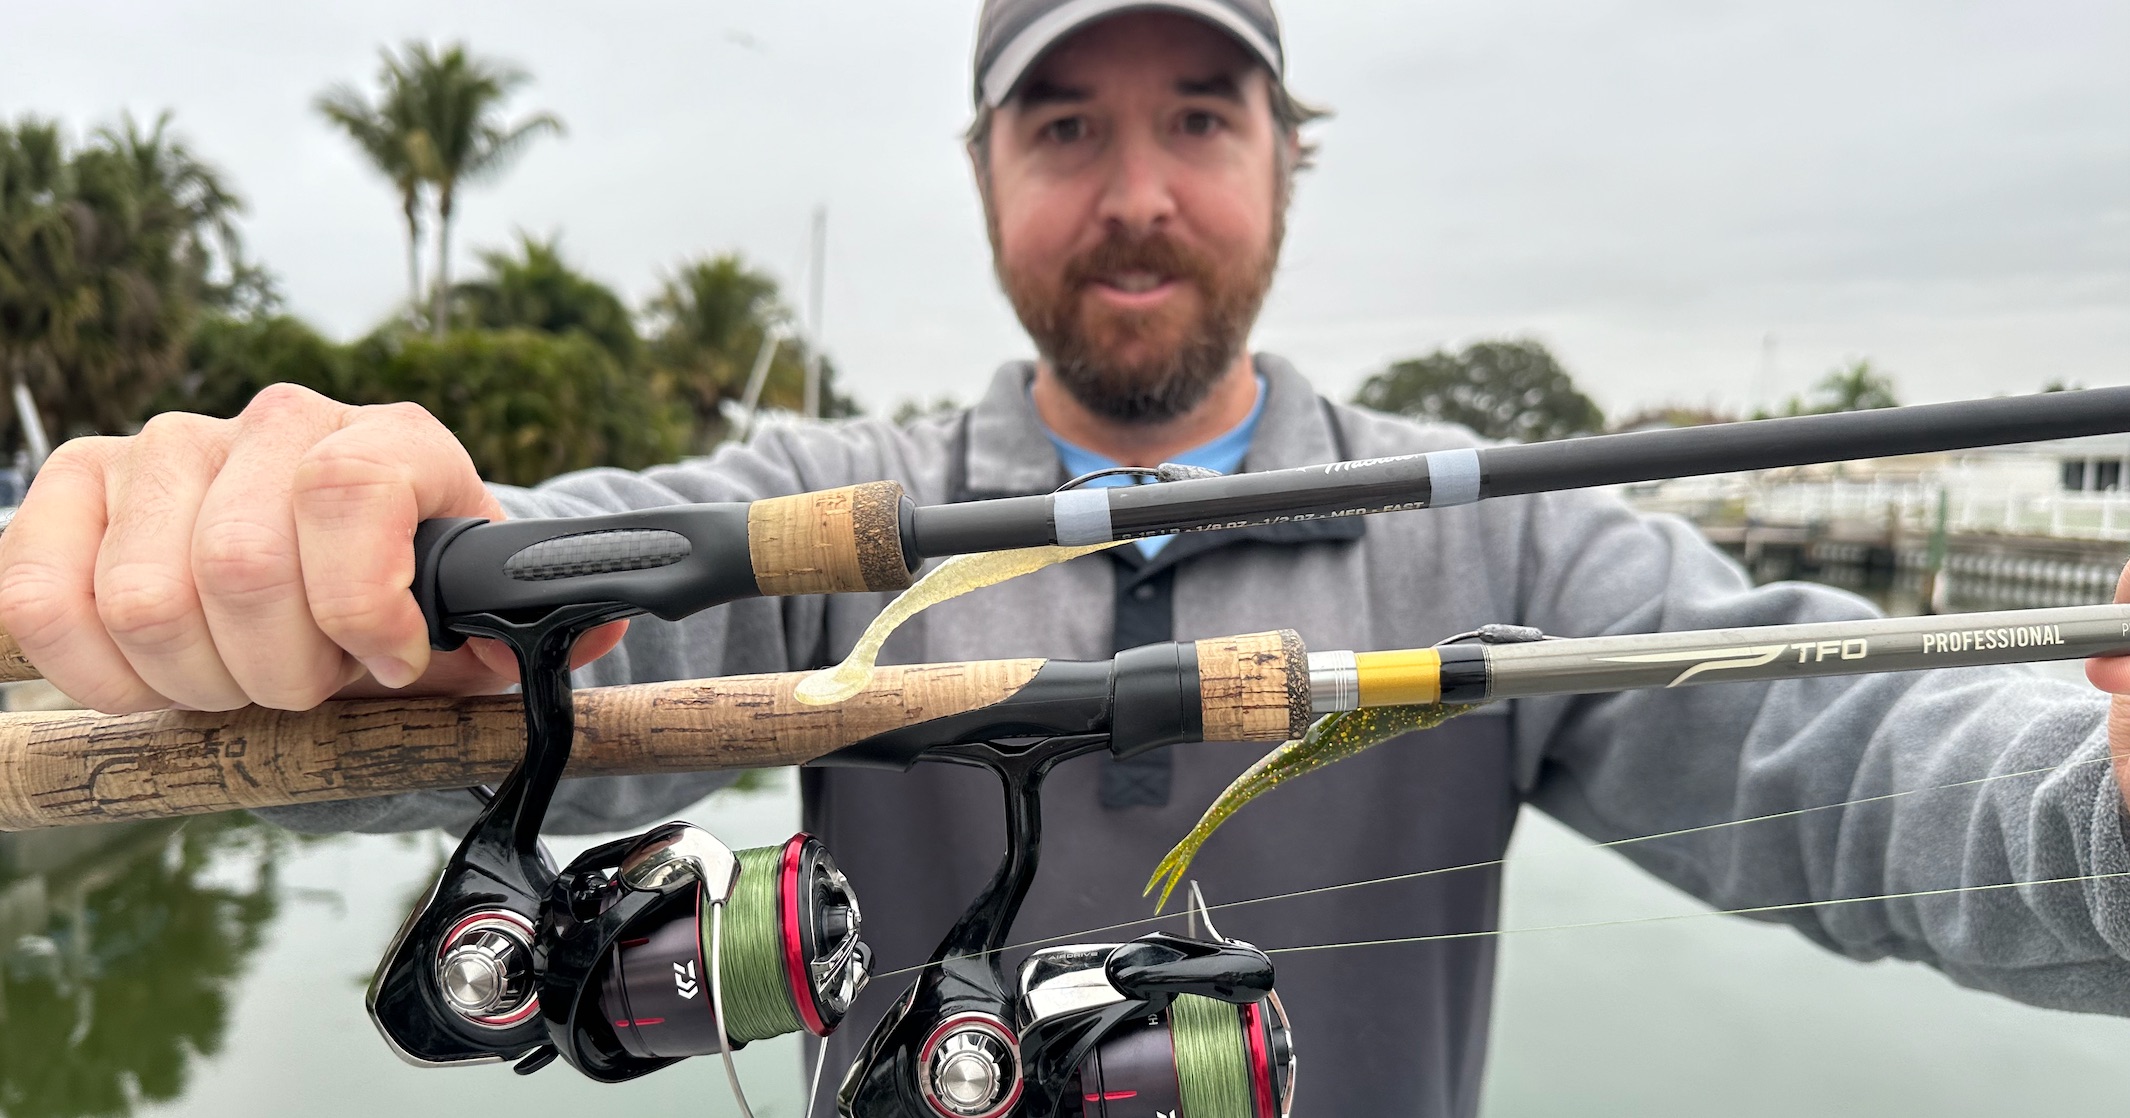 Saltwater Fishing Tips from Salt Strong